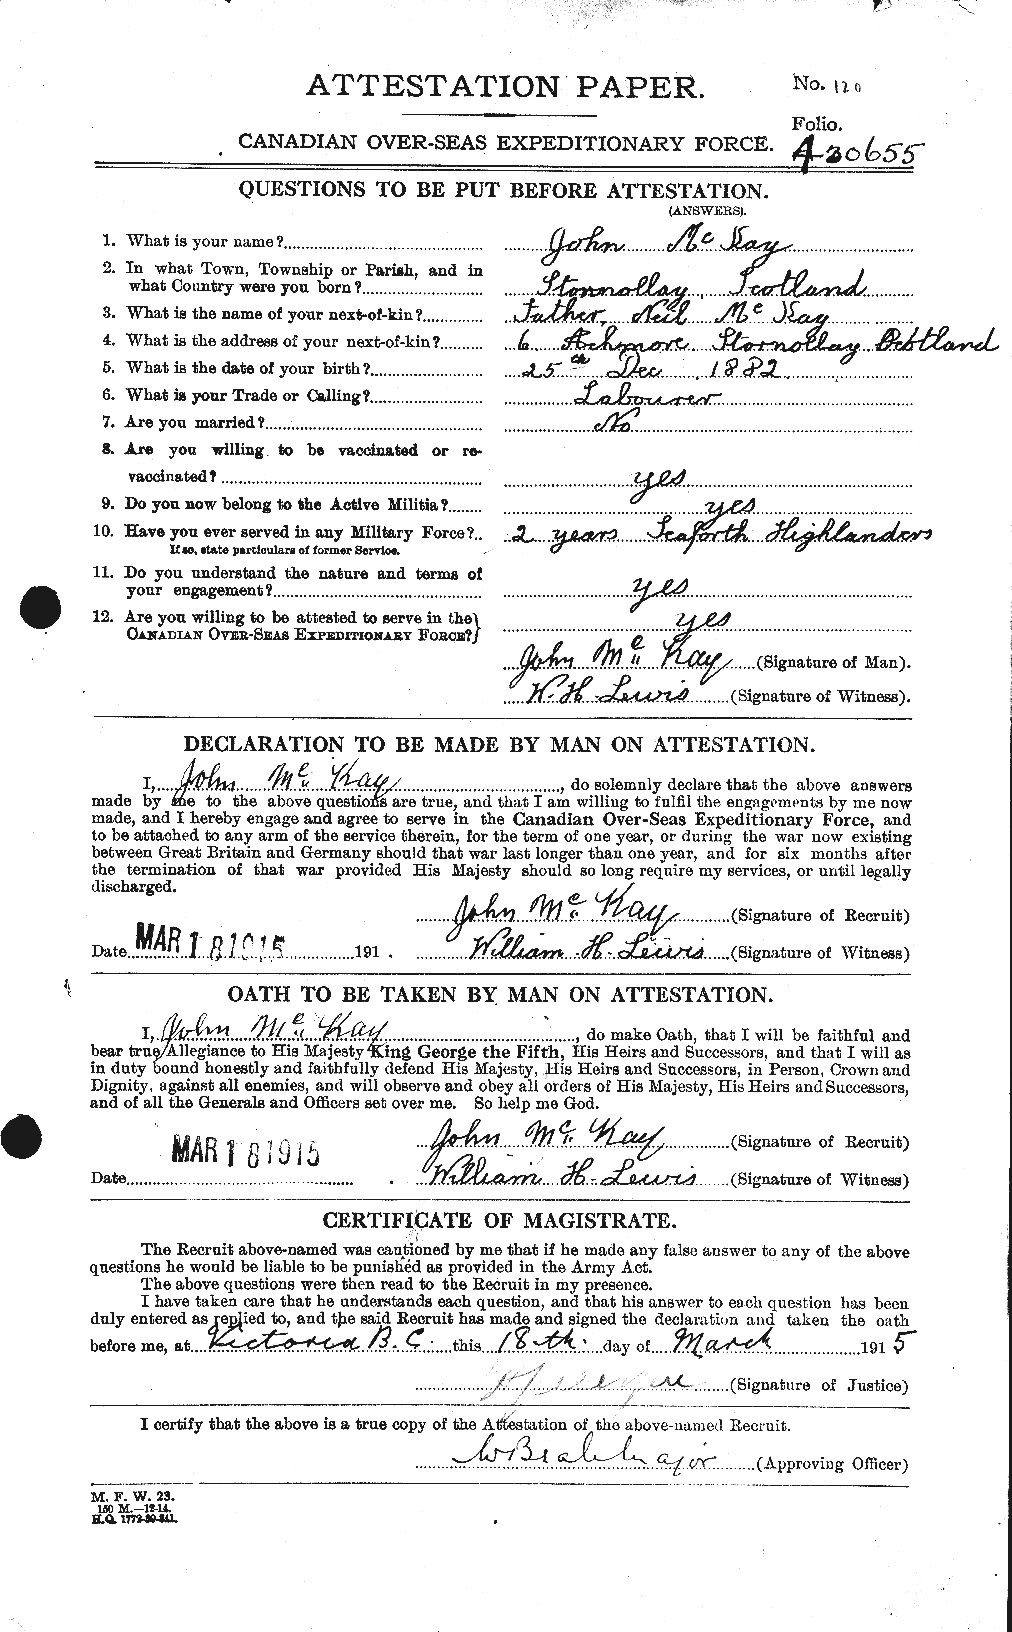 Personnel Records of the First World War - CEF 527006a